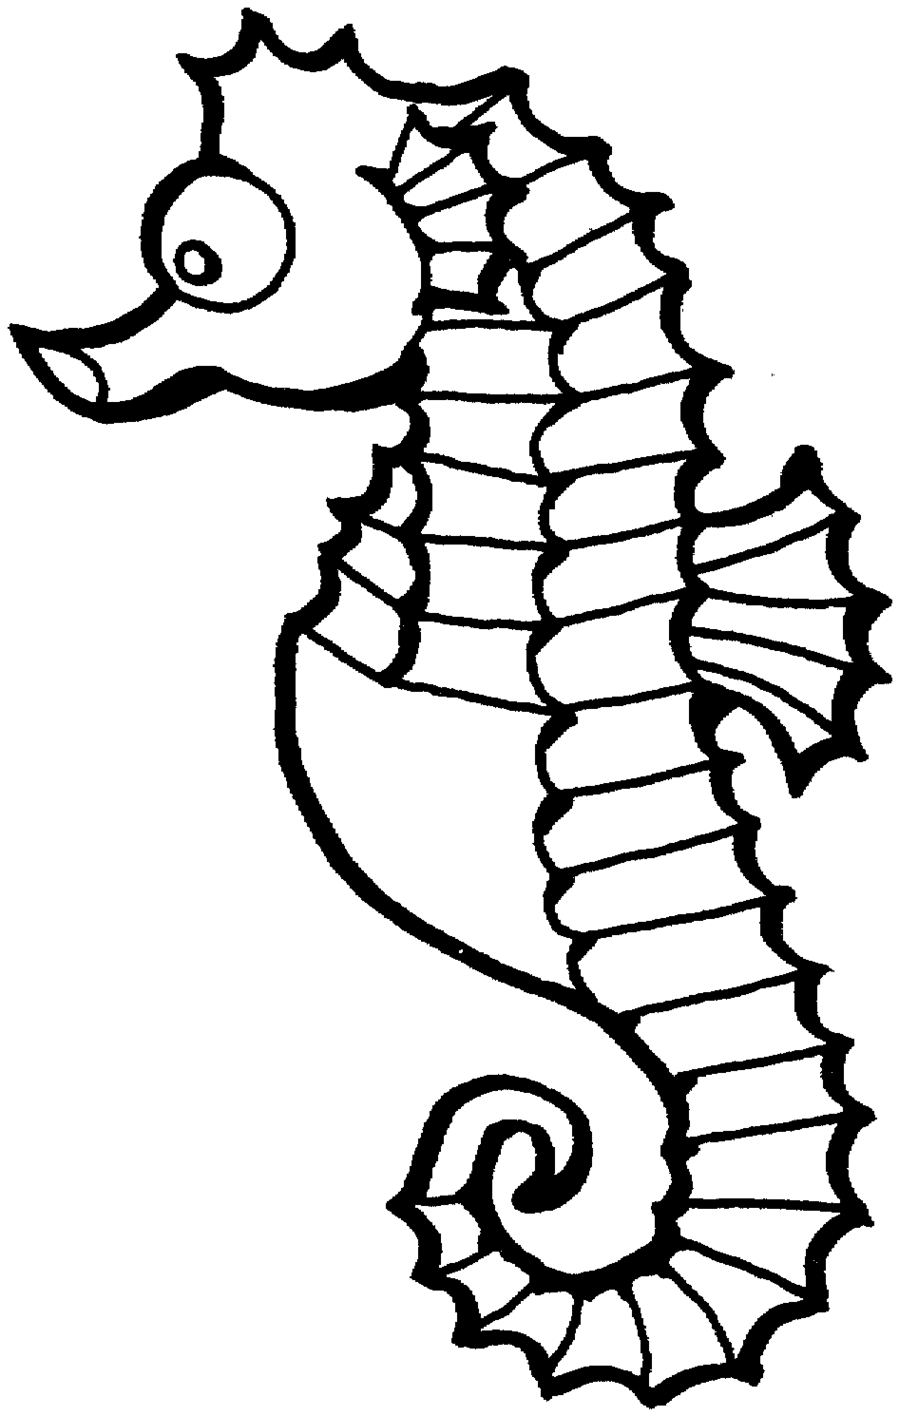 40-seahorse-shape-templates-crafts-colouring-pages-free-premium